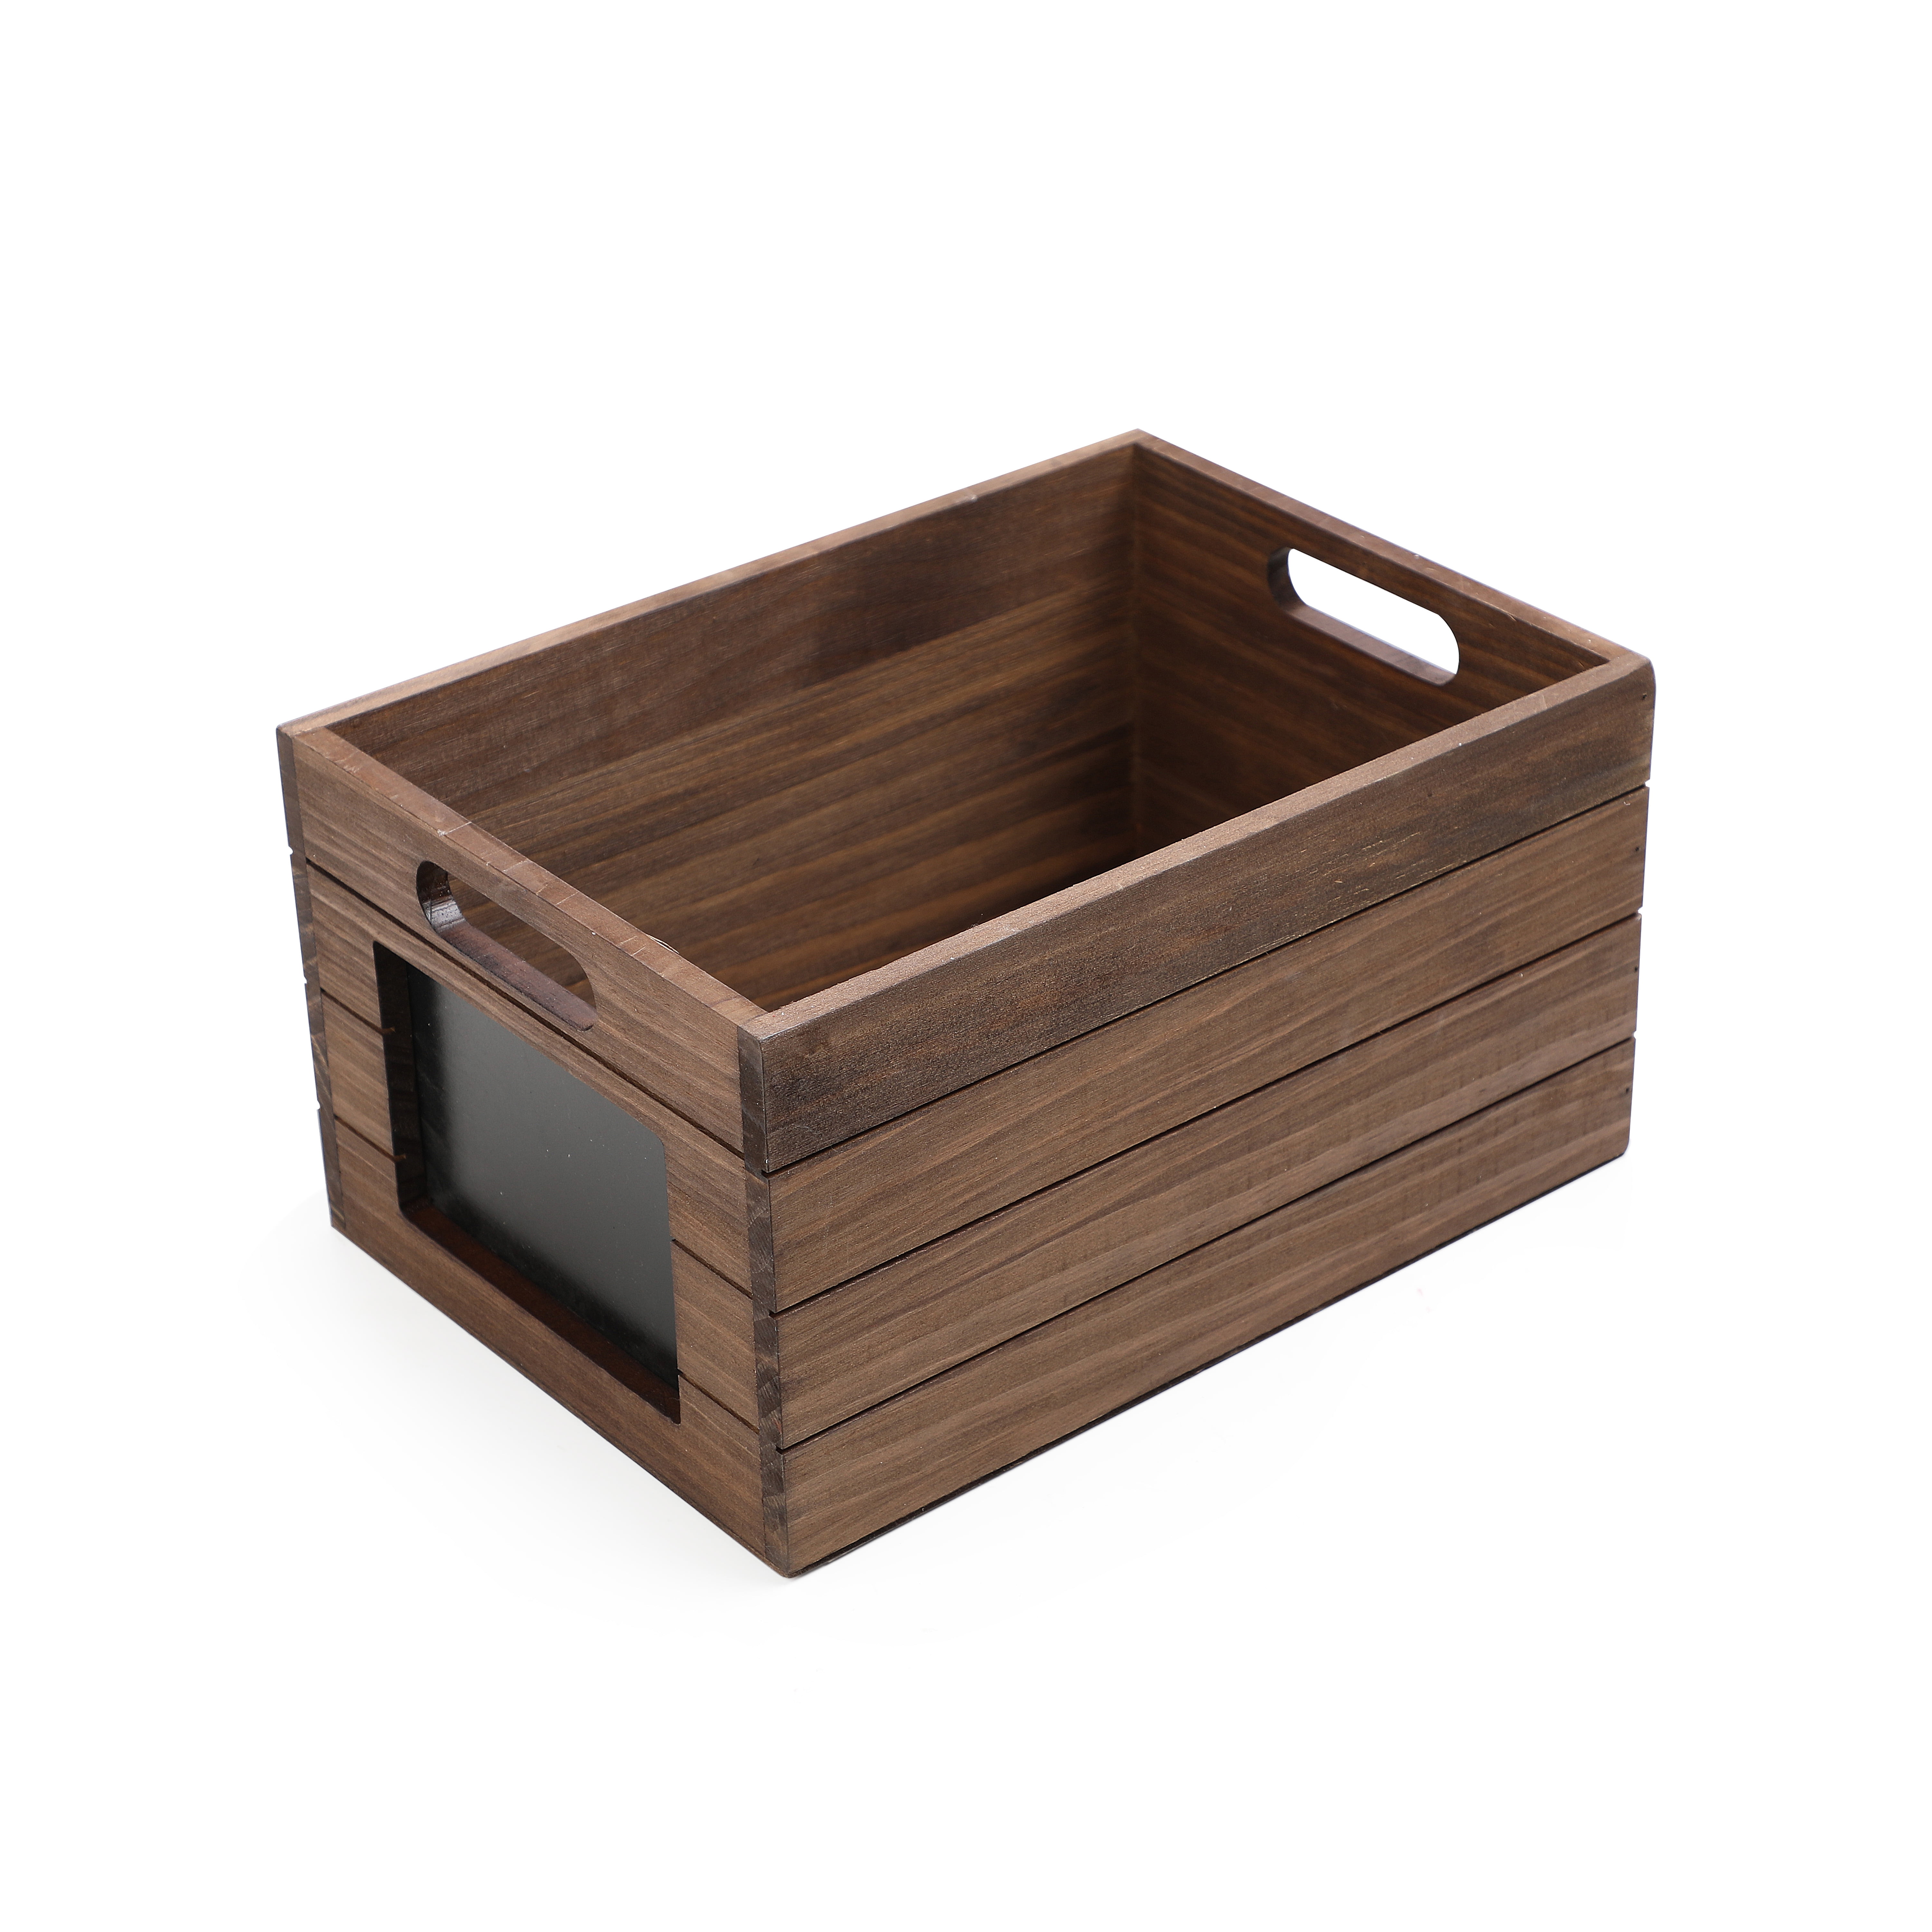 Home Organizers and Storage Multifunctional Decor Box Bamboo Decorative Storage Box Decorative Crates Wooden Crate Organizer Box For Home & Bathroom 